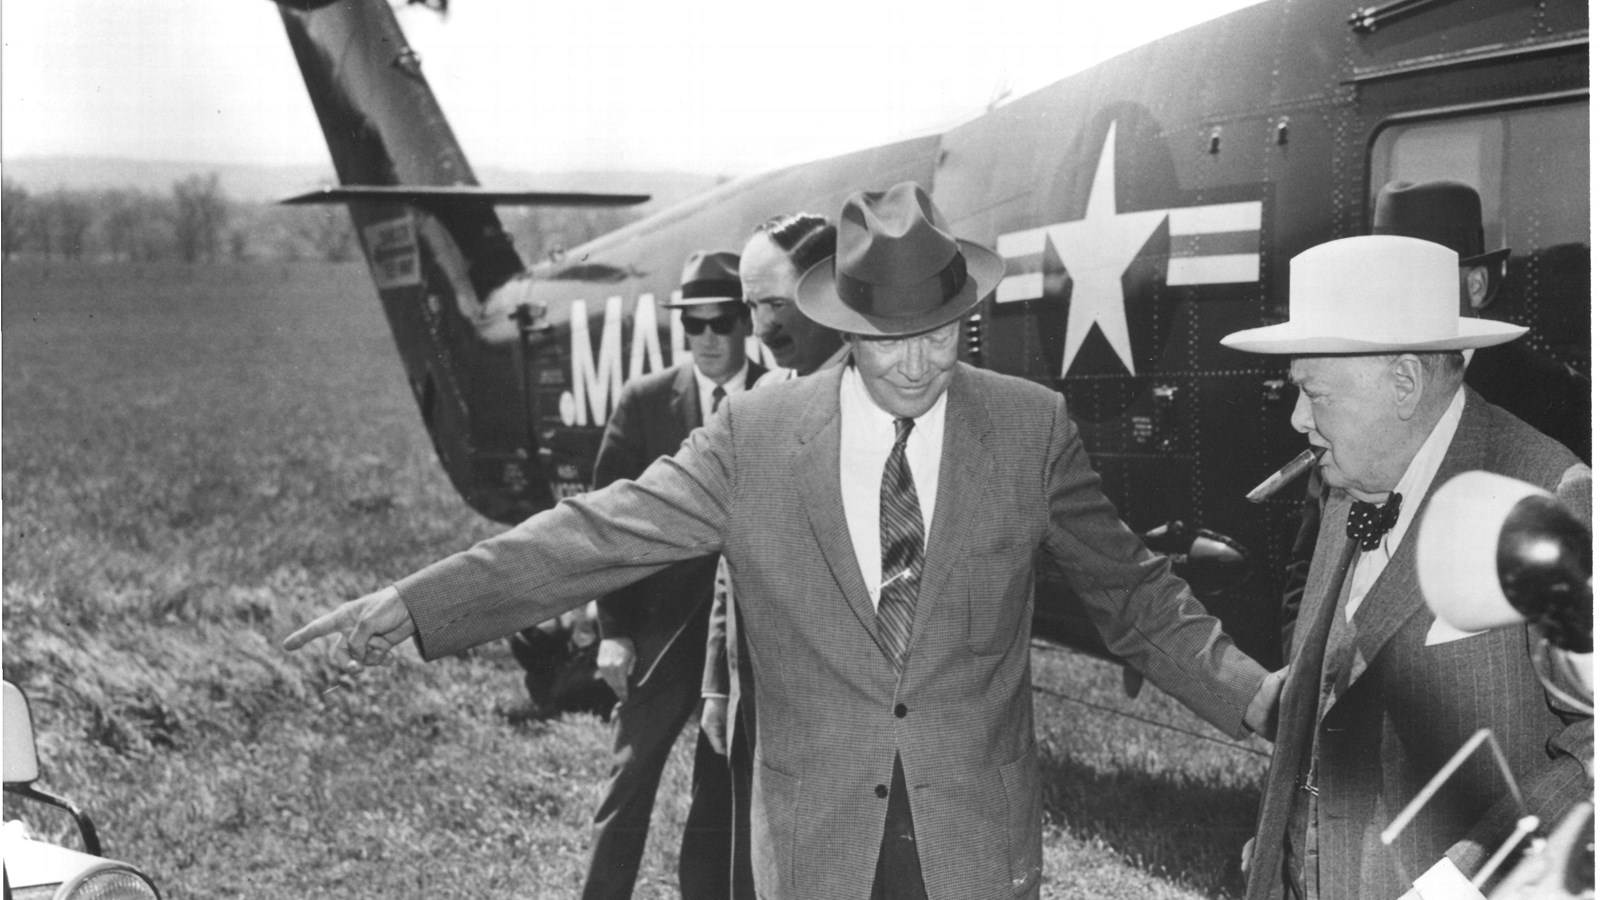 A black and white image of a US Marine Helicopter with Eisenhower and Churchill at the farm.